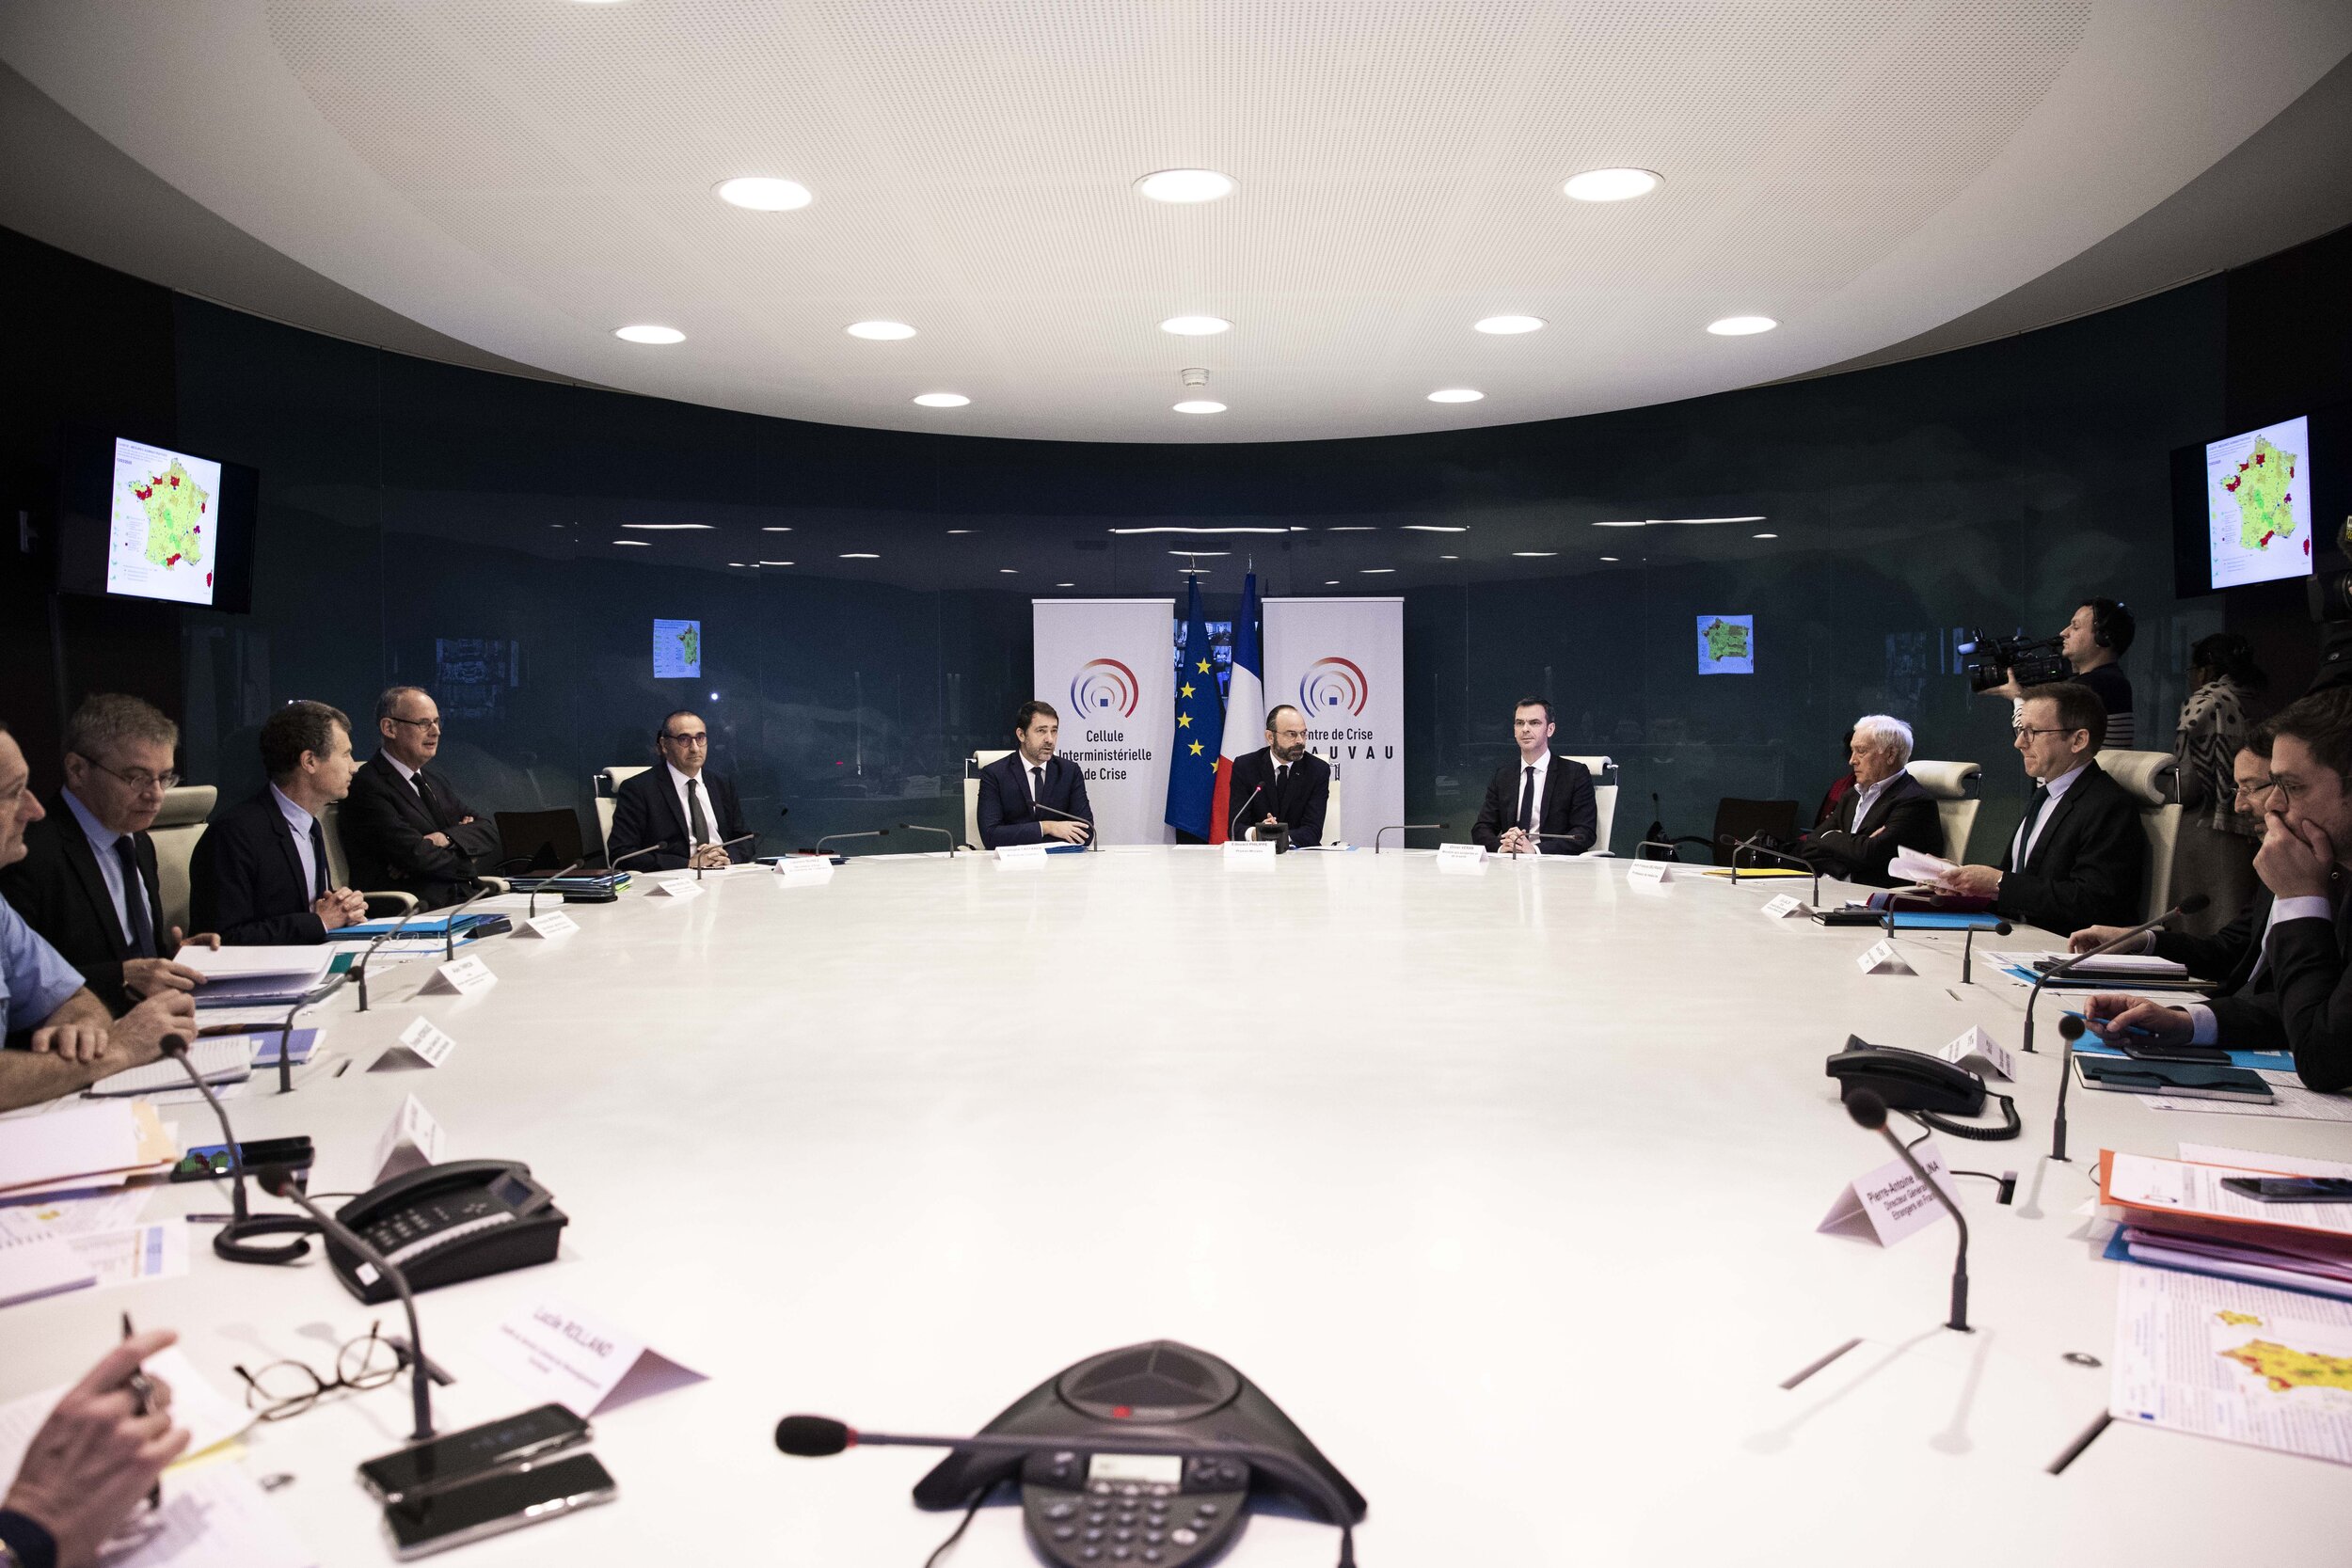   © Alexis Sciard / IP3; Paris, France, March 13, 2020 - The Prime Minister Edouard Philippe, Minister for Health Olivier Veran and President of the Scientific Council Jean Francois Delfraissy are received by the Interior Minister Christophe Castaner